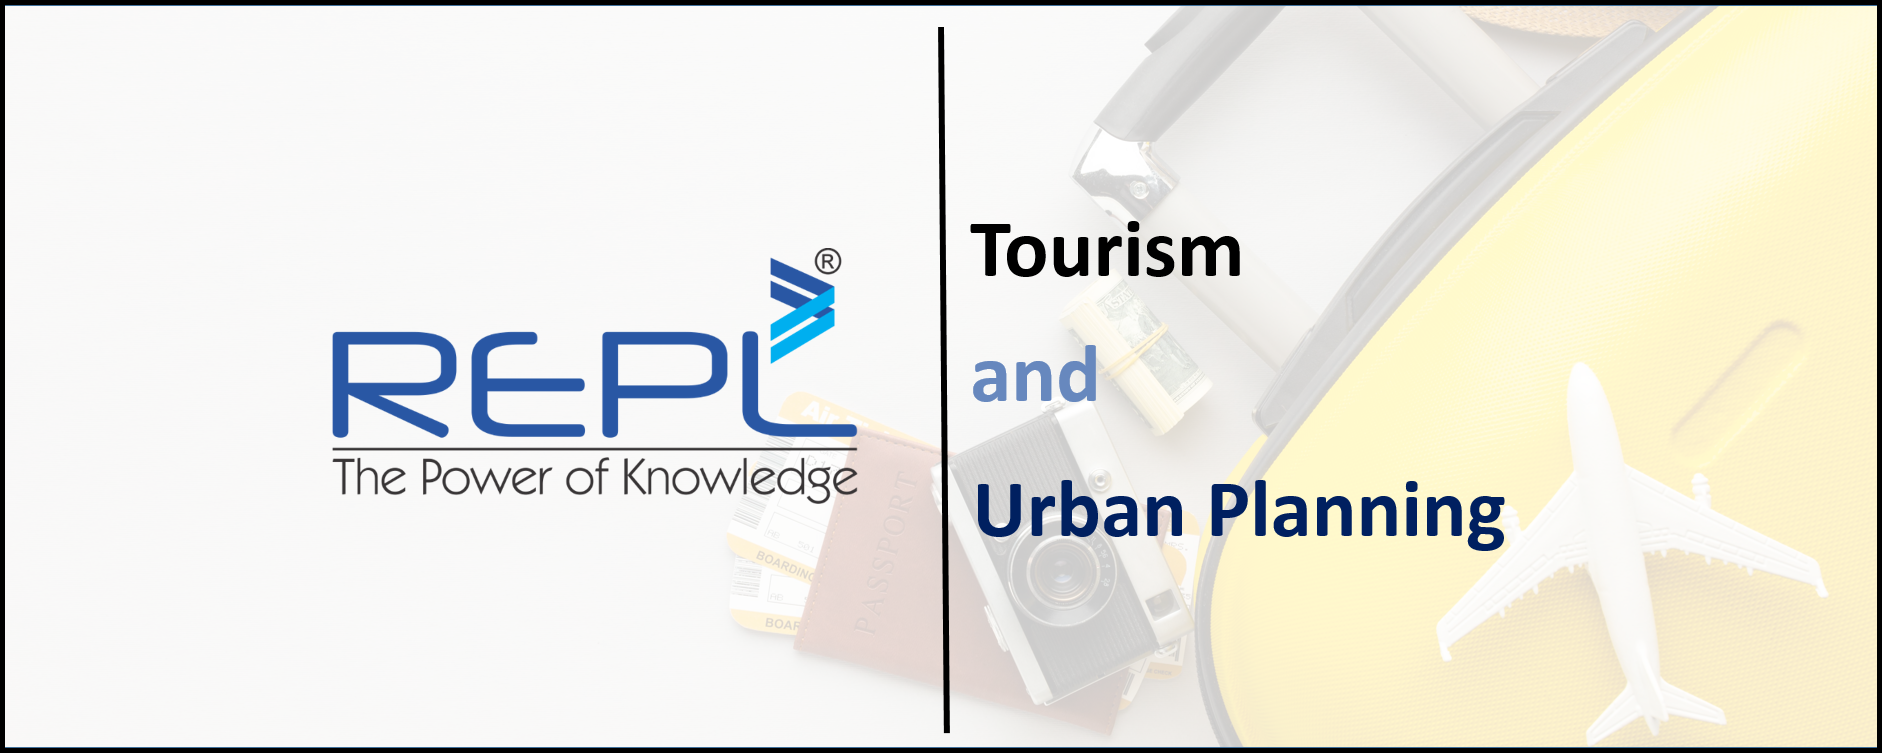 urban tourism planners specific uses